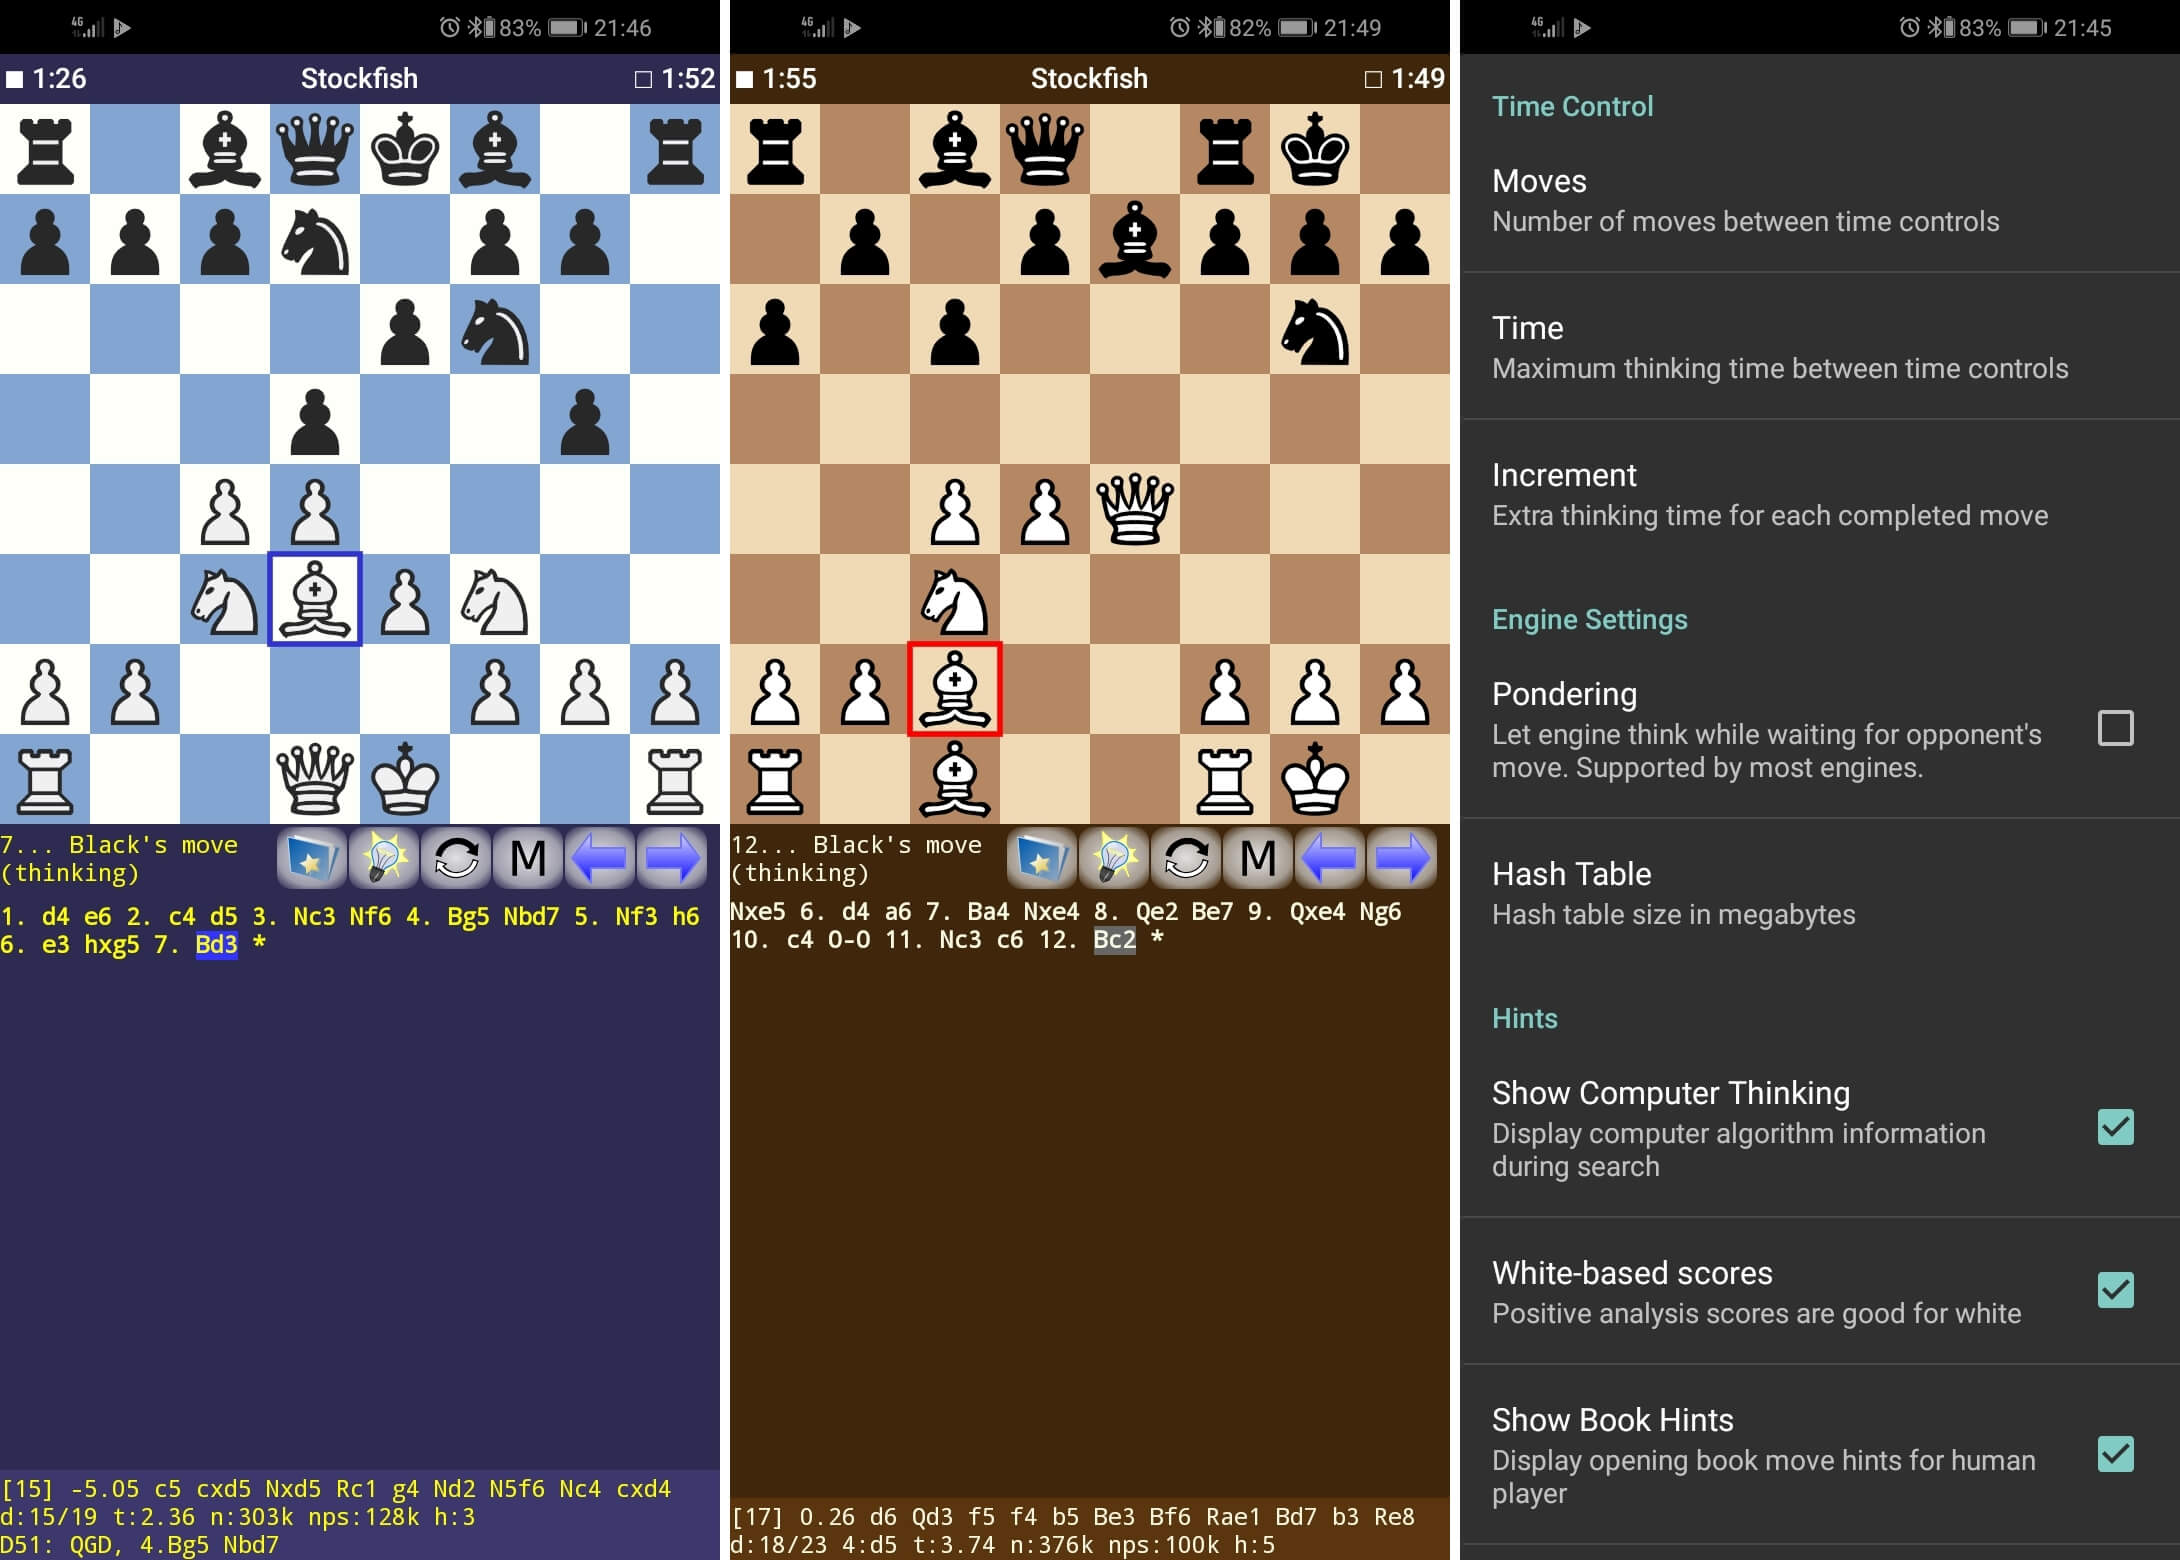 Best Free Android Apps: DroidFish - Stockfish chess engine - LinuxLinks